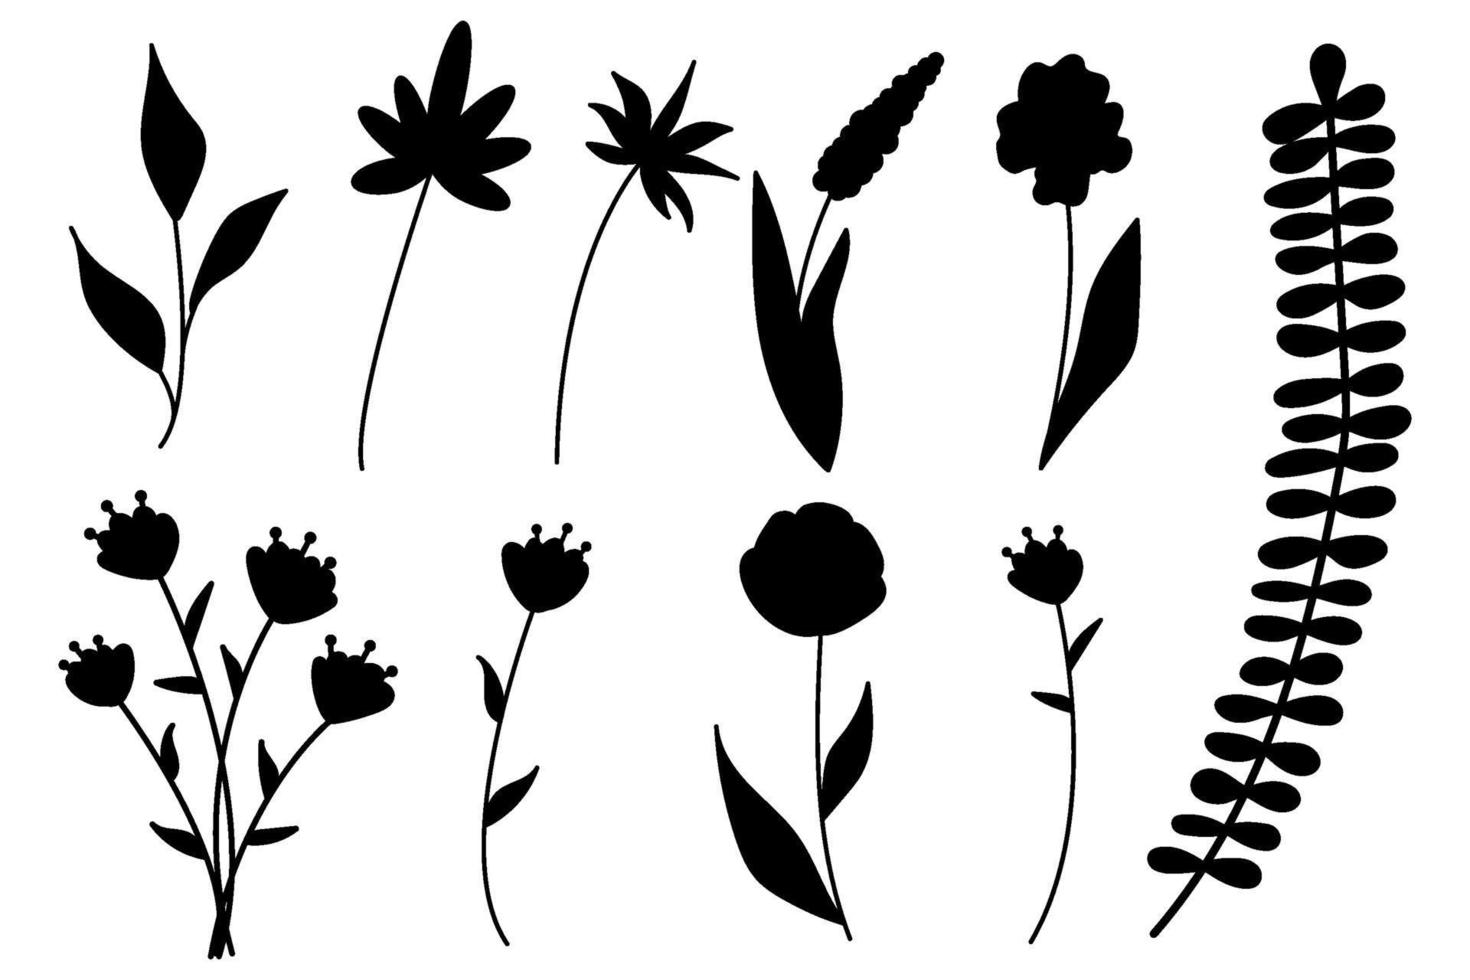 Collection of minimalistic simple floral elements. Graphic sketch. Fashionable tattoo design. Flowers, grass and leaves. Botanical natural elements. Vector illustration. Outline, line, doodle style.